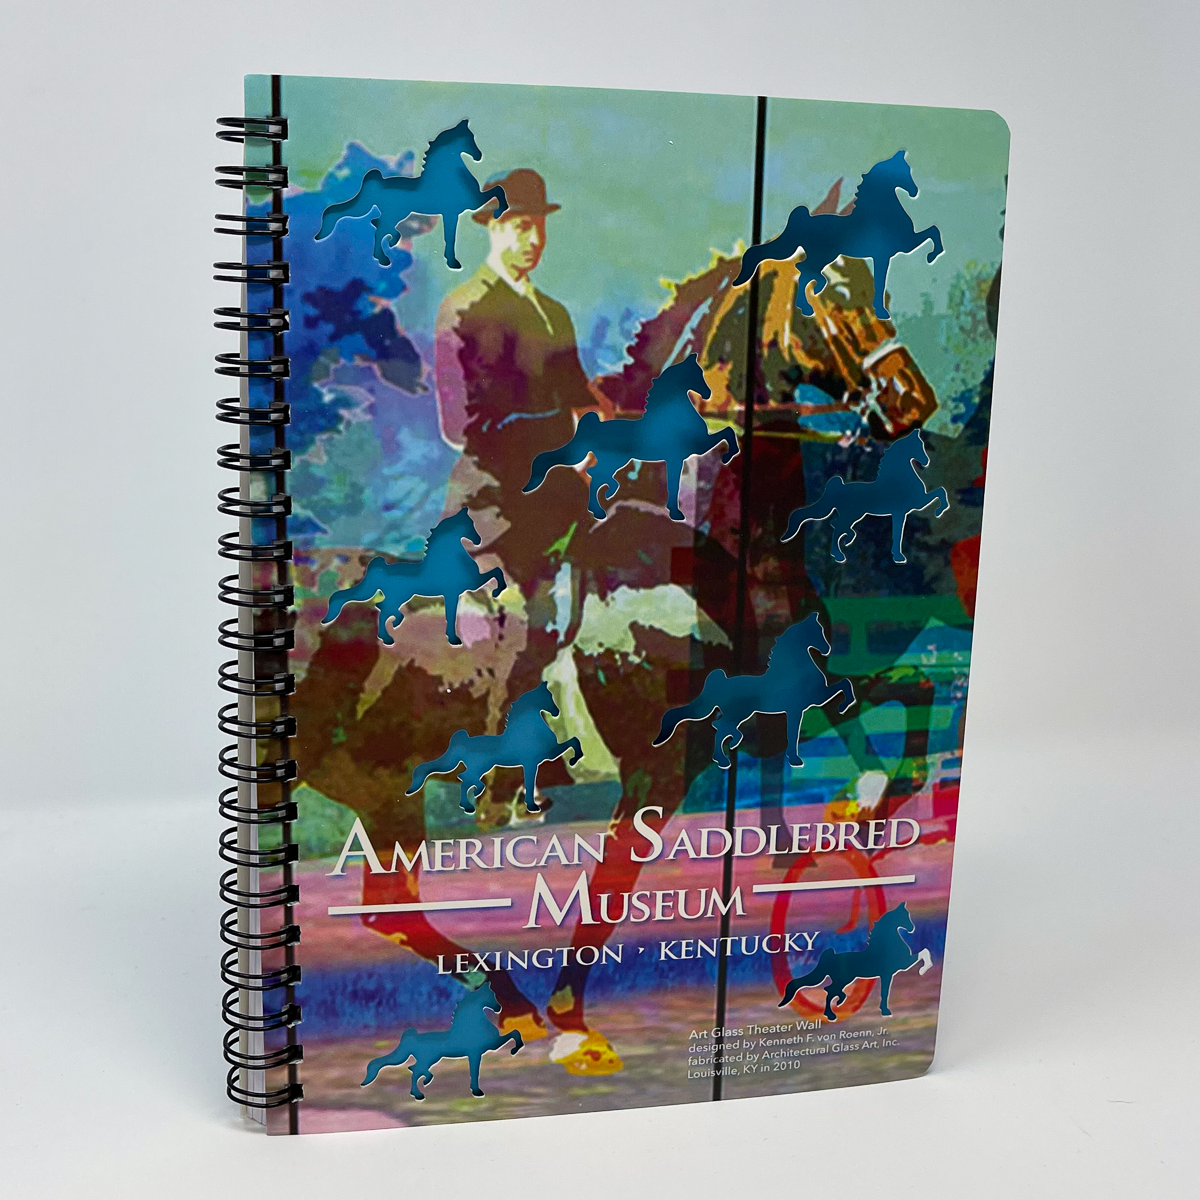 American Saddlebred Museum Spiral Notebook Cover with Horse and Rider Image and Cutout Horses at an Angle